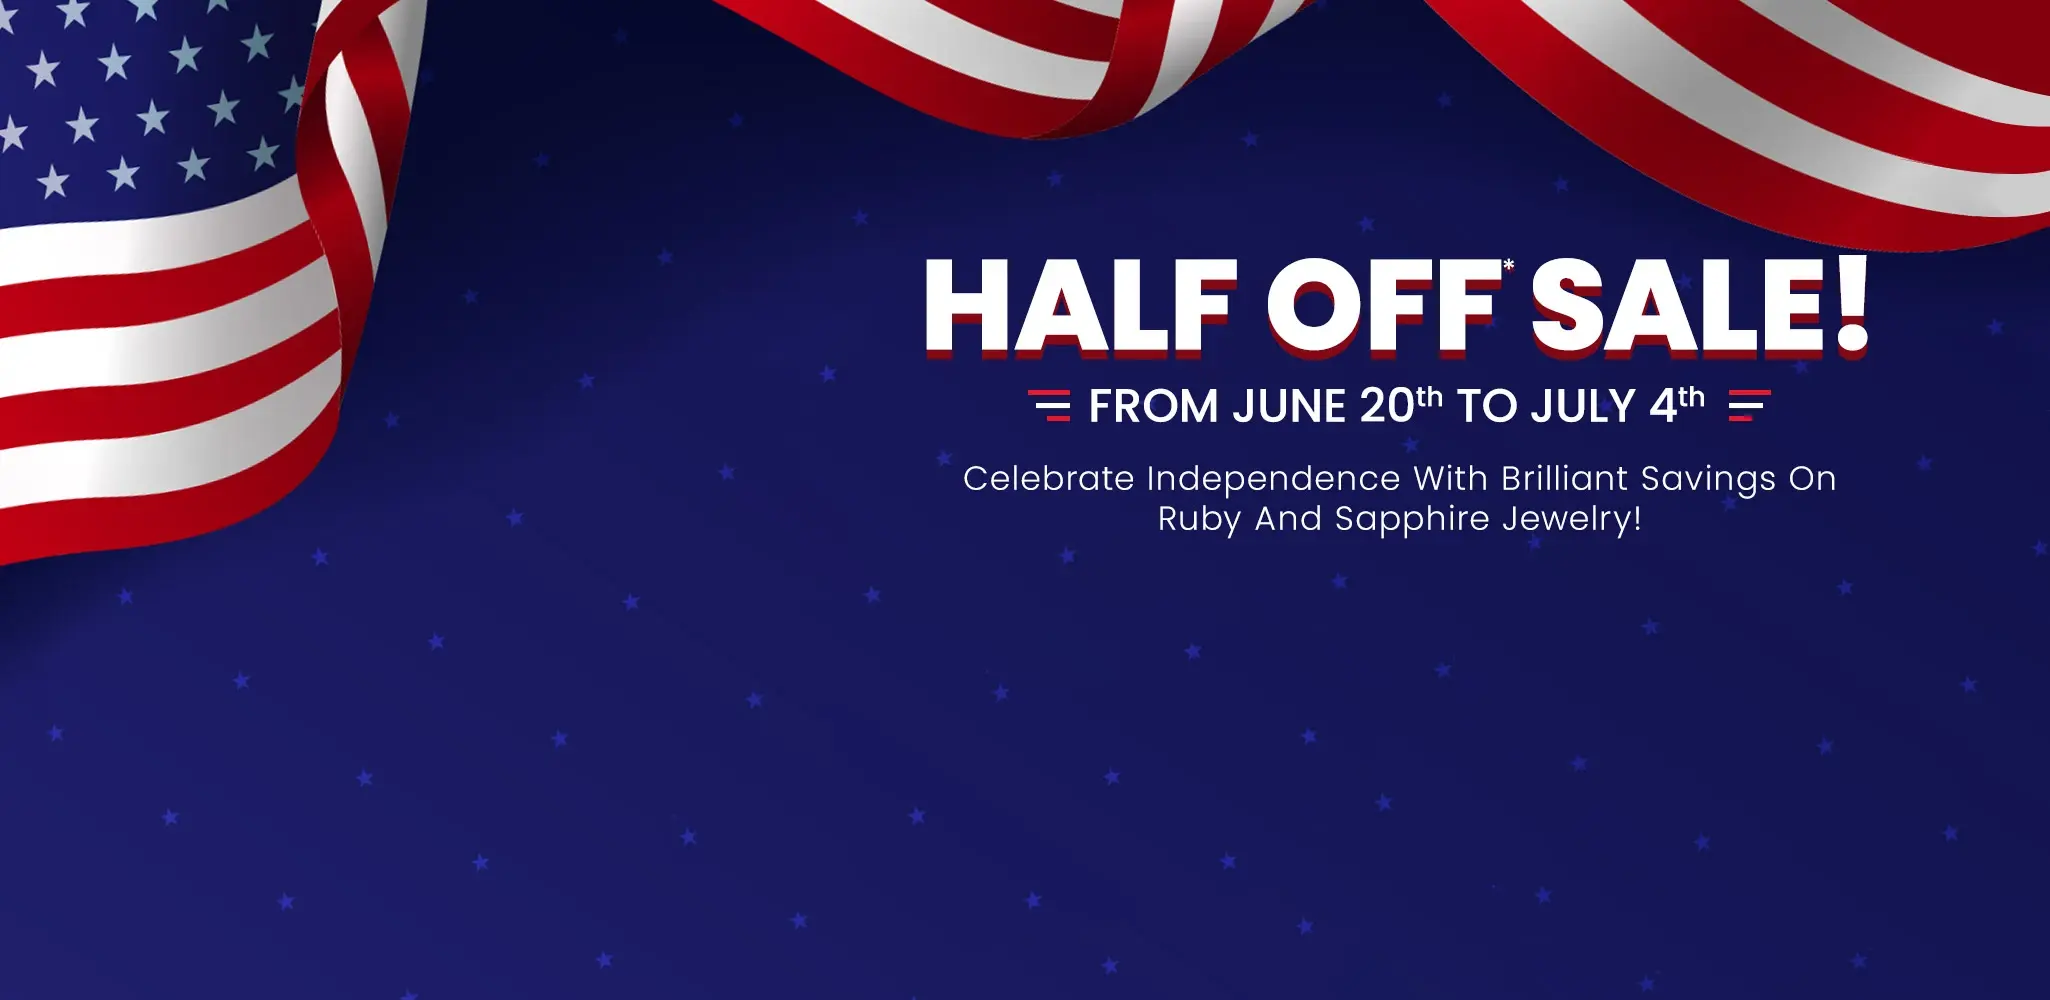 Celebrate Independence With Brilliant Savings At M & M Jewelers